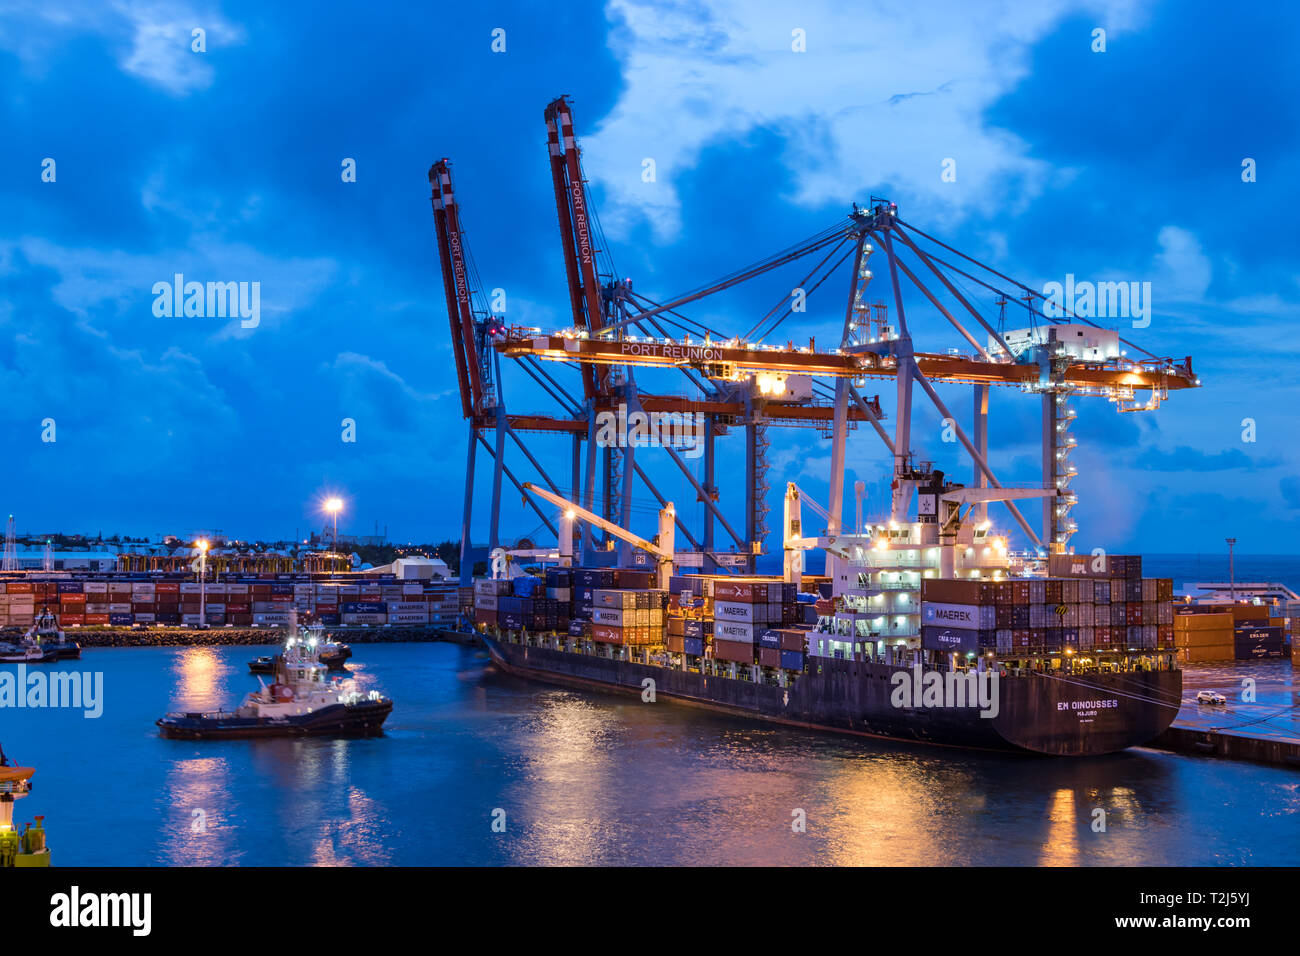 Saint Denis, Reunion Island - January 26th, 2019: Cranes and cargo  containers ships at the Port of Saint Denis in Reunion Island in the  evening. (Fran Stock Photo - Alamy